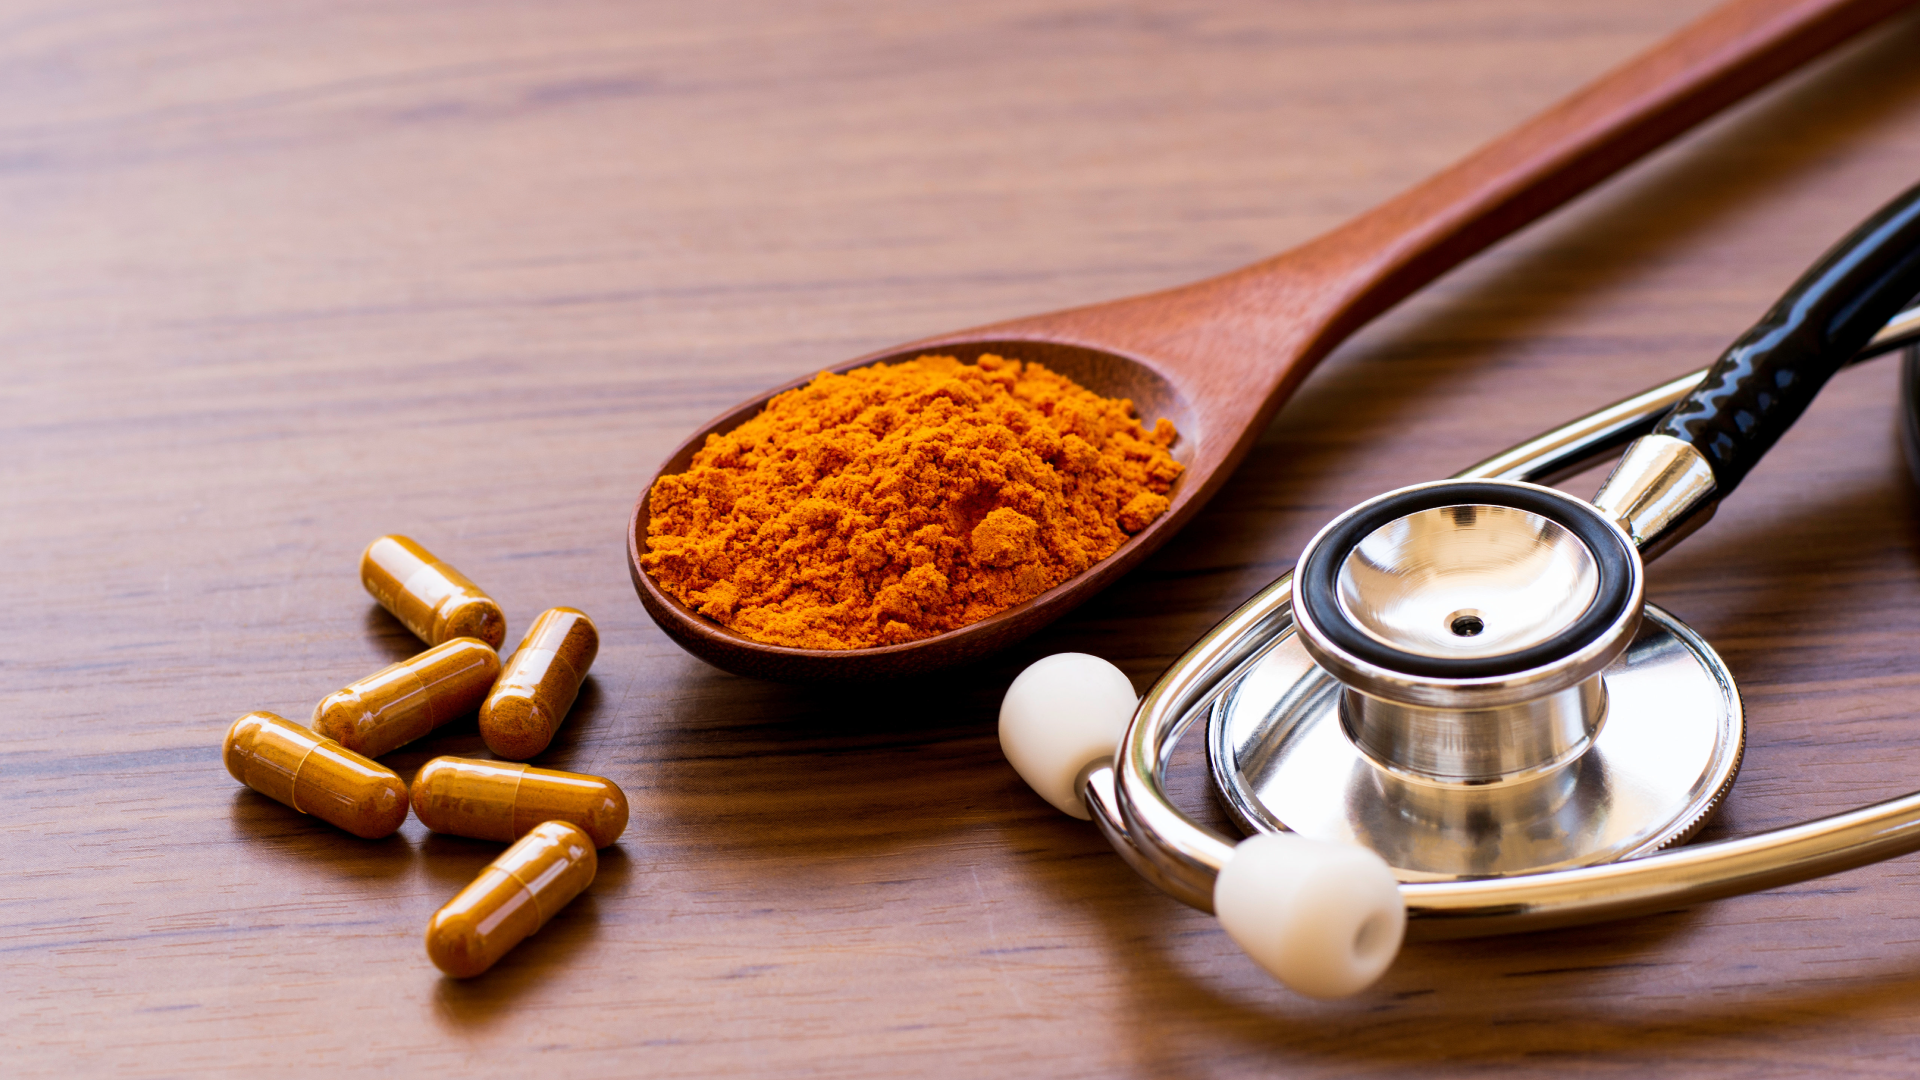 Turmeric in it's powdered form and supplement form with a stethoscope representing the health benefits of turmeric.